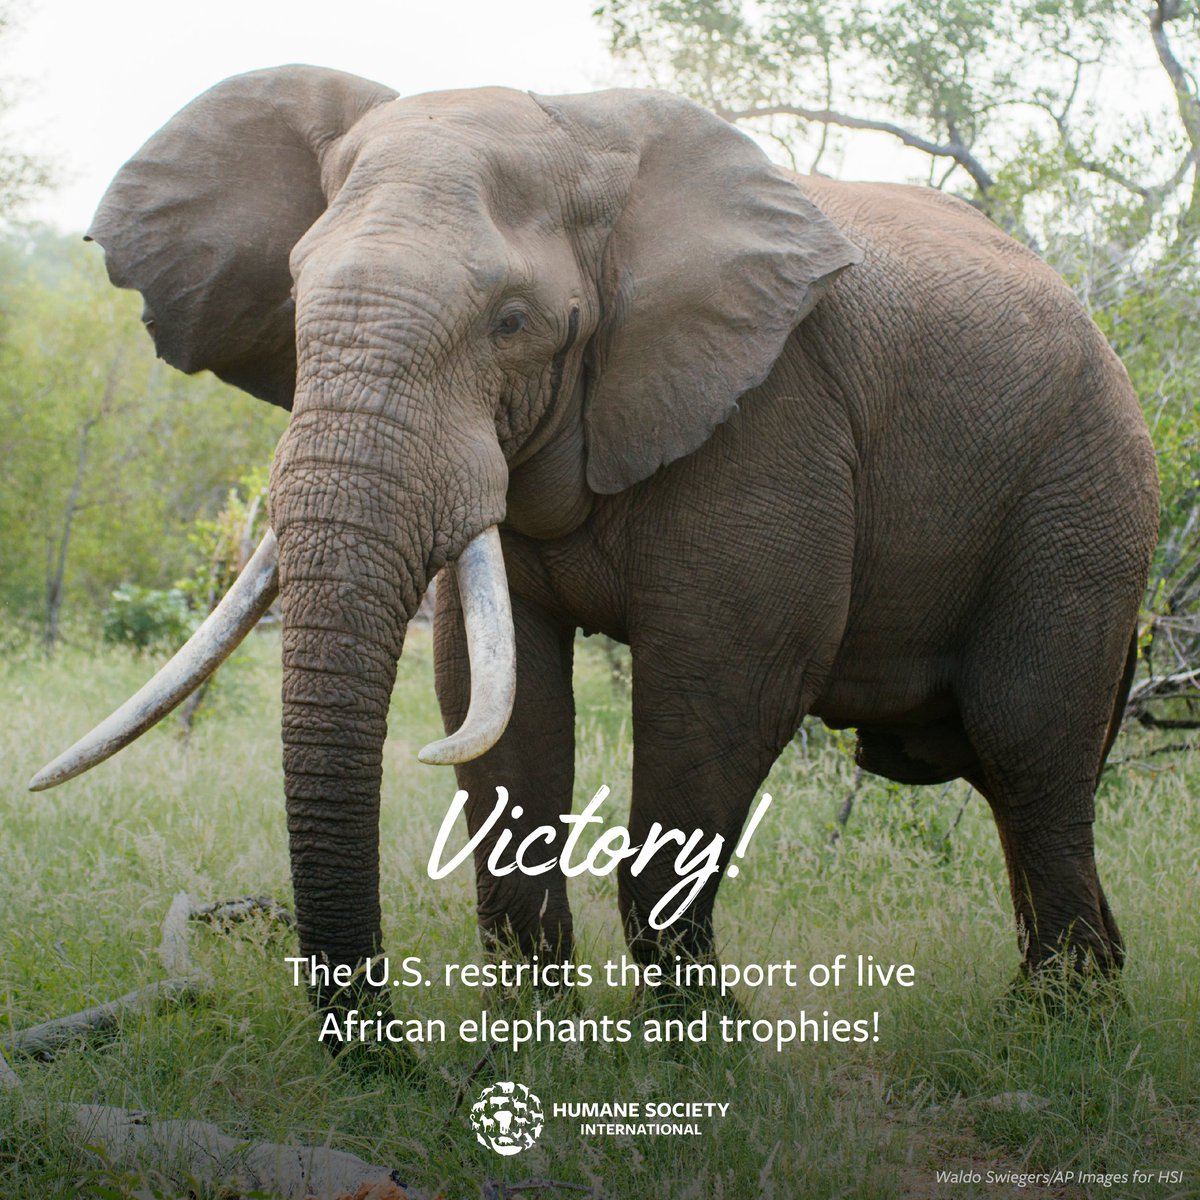 🐘 Big news! 🎉 The U.S. has increased federal protections for African elephants, providing better scrutiny and restrictions for the import of live African elephants and their hunting trophies thanks to your support and our ongoing advocacy efforts. HSI remains committed to